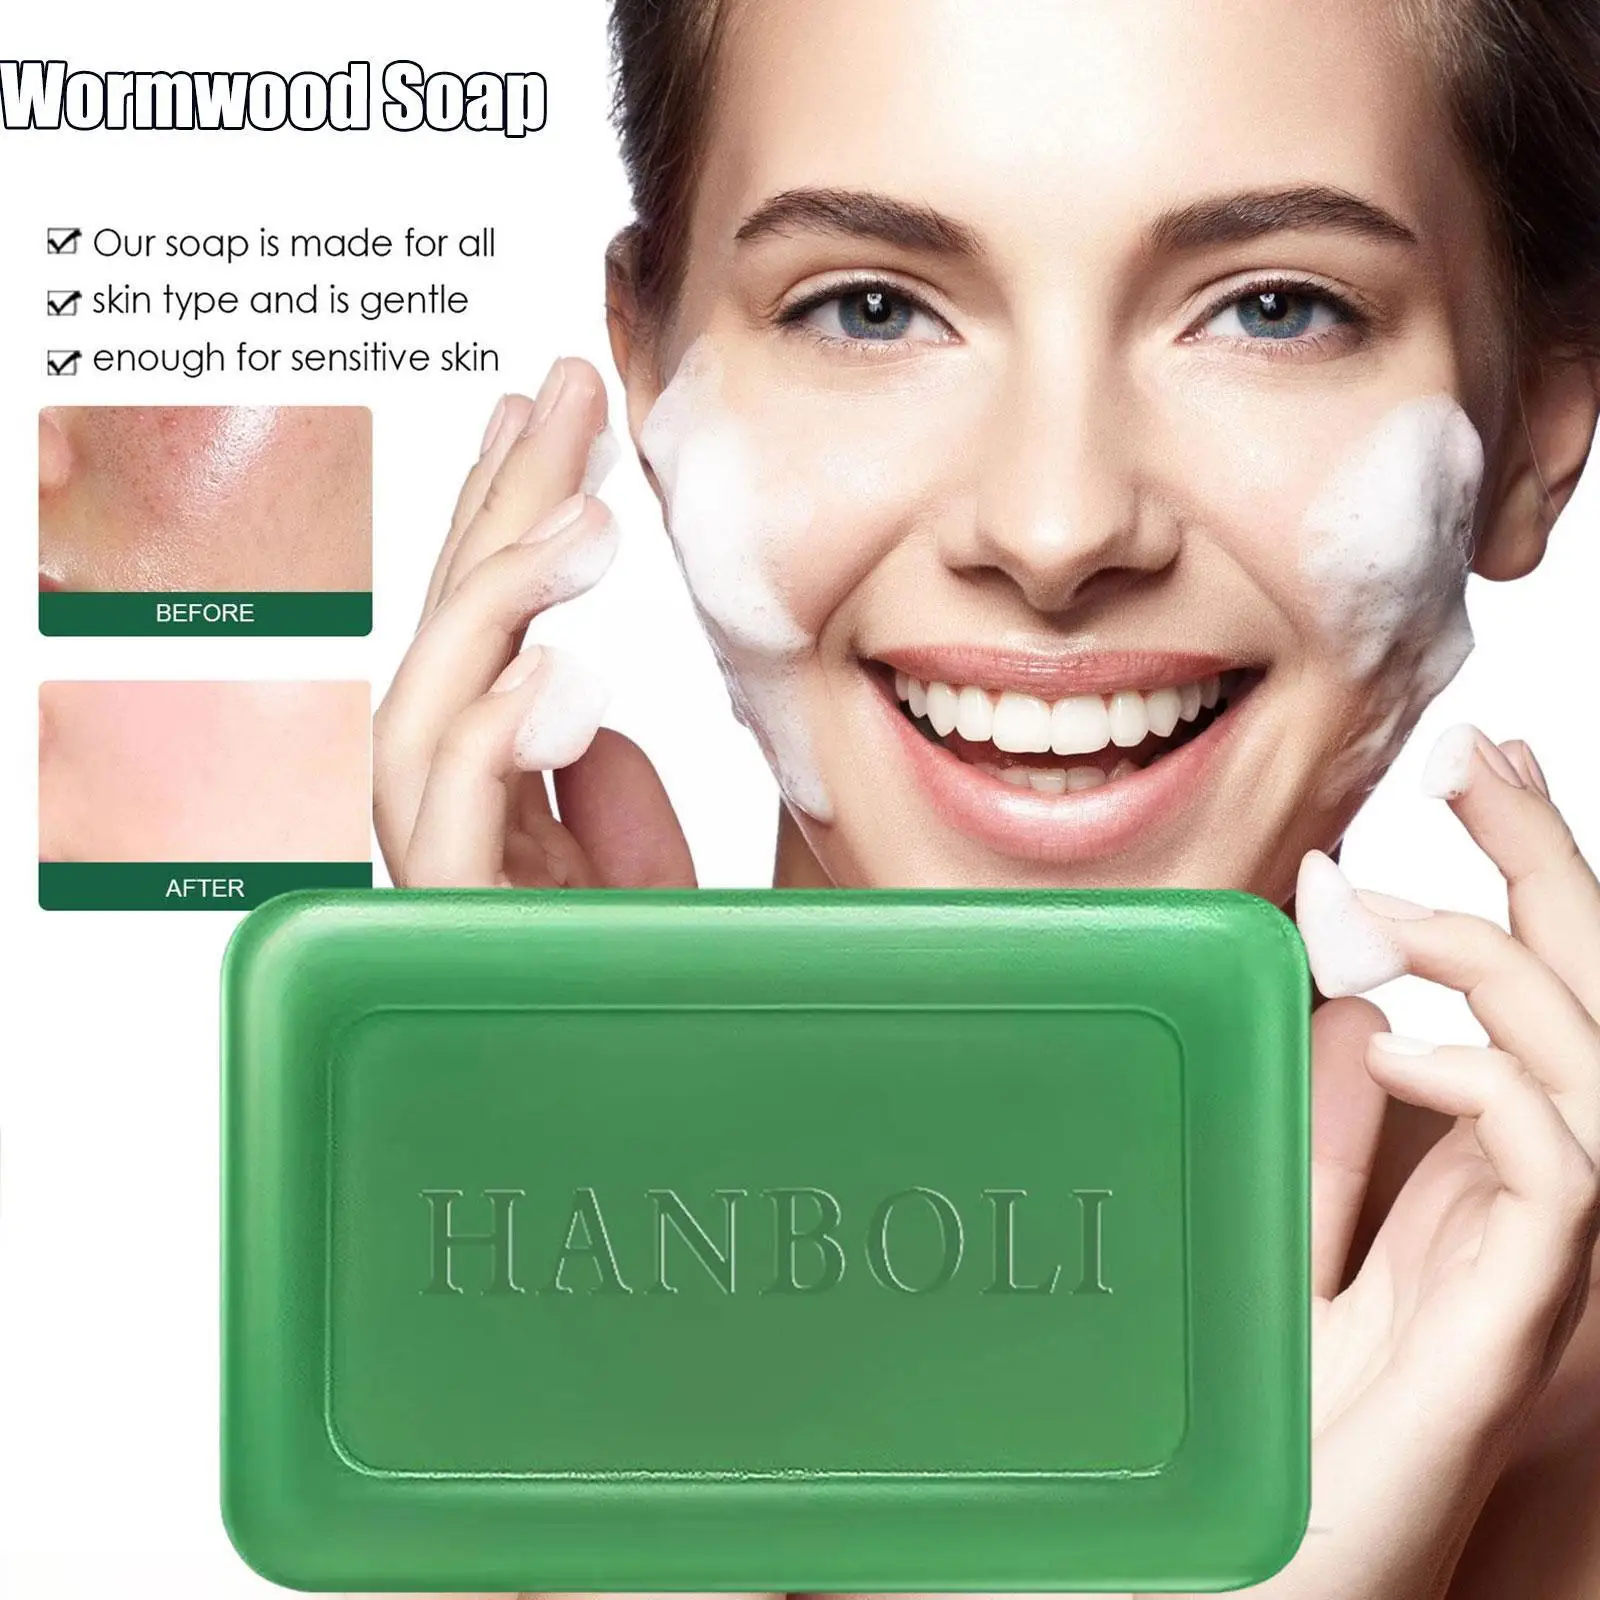 

Wormwood Soap Anti Fungus Itching Mite Blackhead Acne Cleaning 100g Care Body Skin Soap Face Body Soap Control Remove Oil B Q8S9